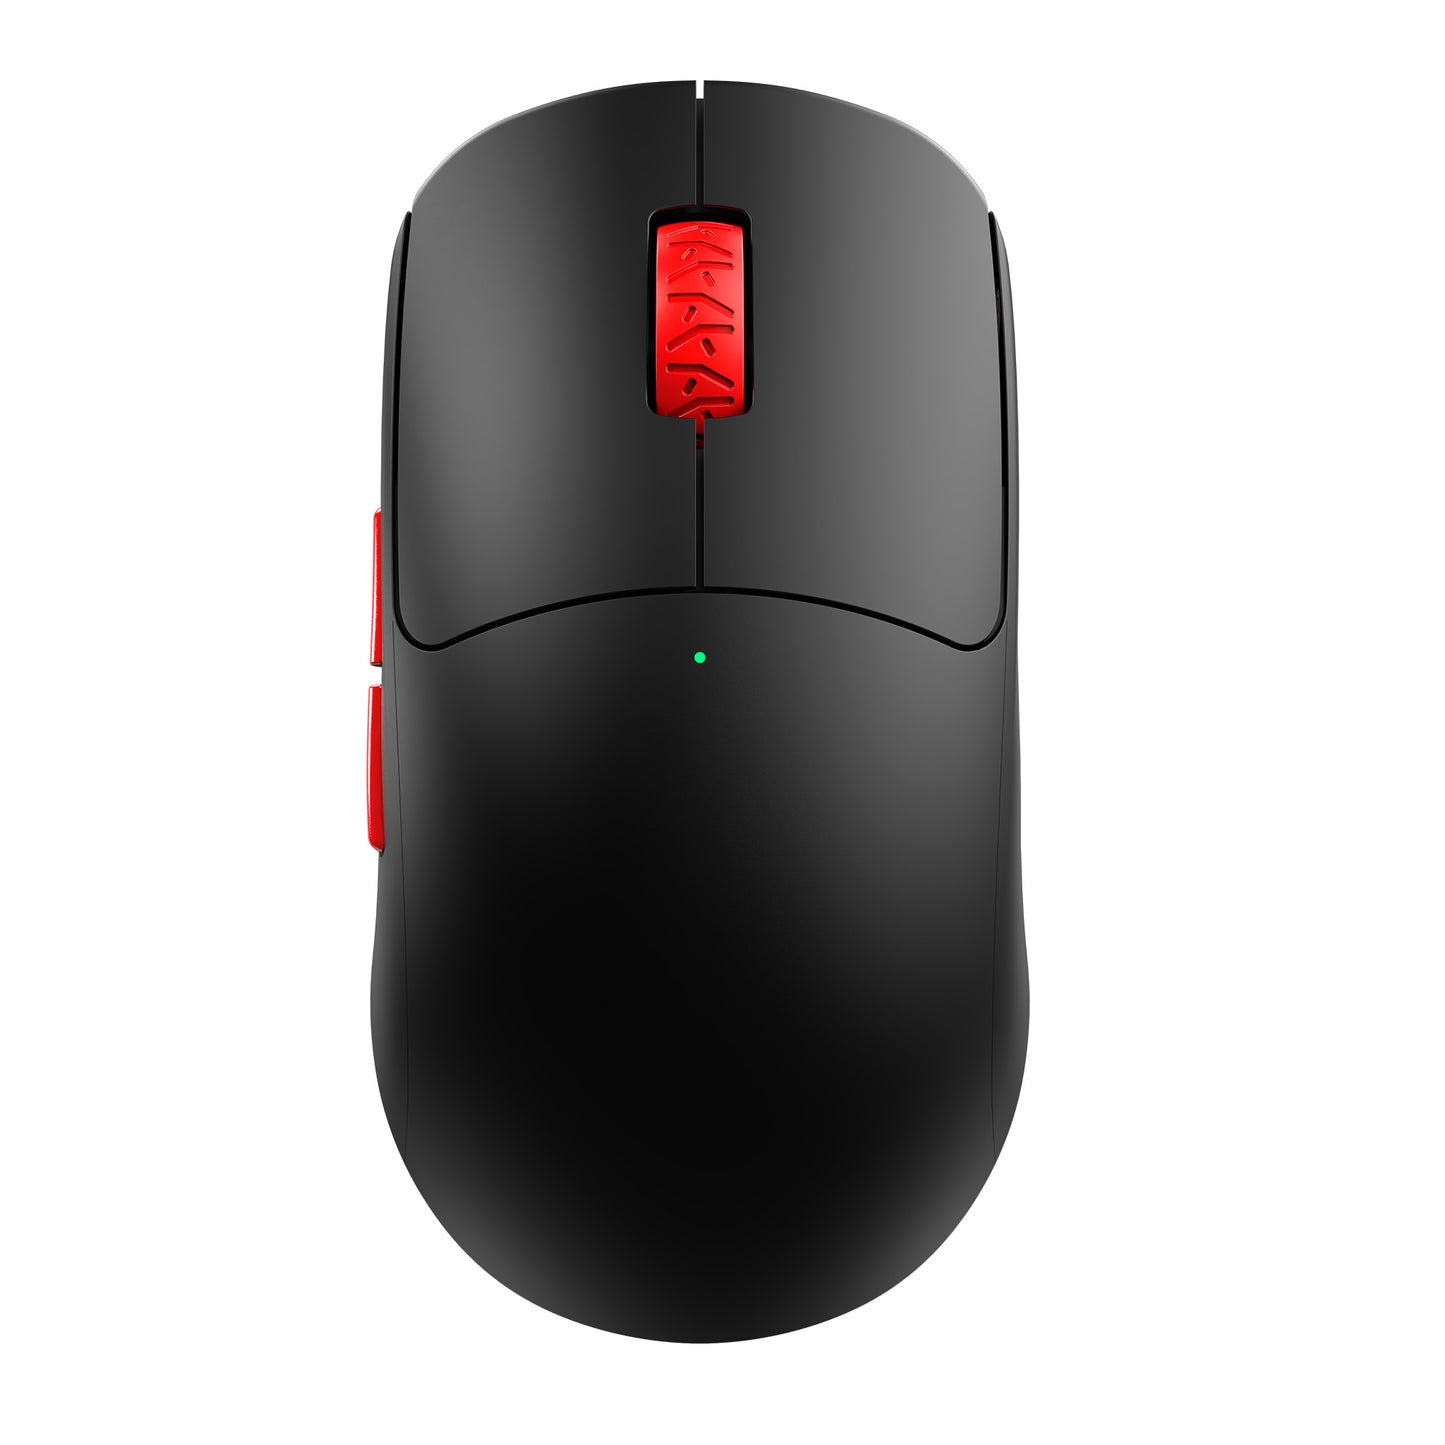 GITOPER G2 Light Weight Wireless Gaming Mouse